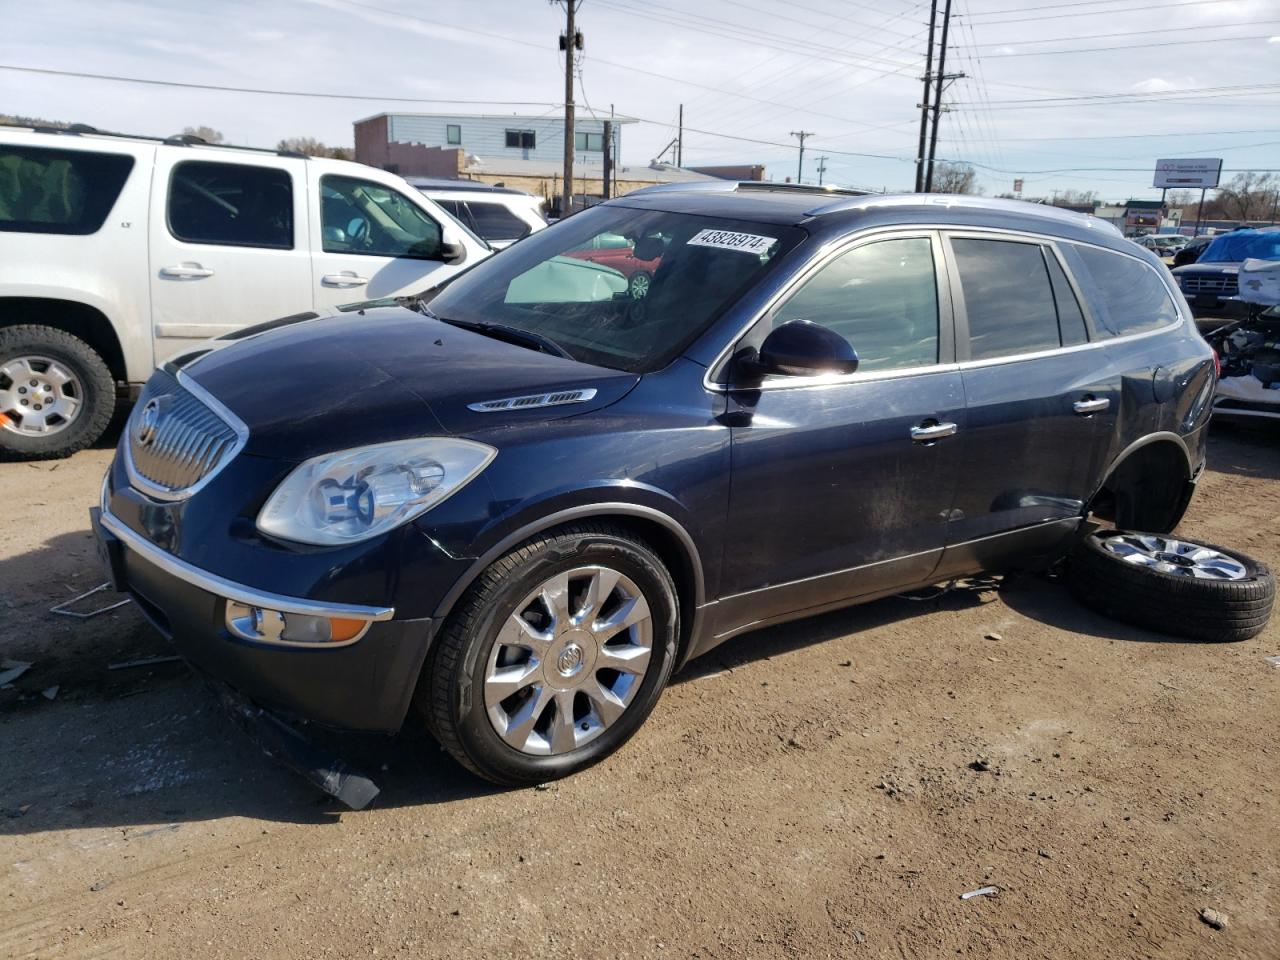 vin: 5GAKVCED4BJ405445 5GAKVCED4BJ405445 2011 buick enclave 3600 for Sale in 80907 5336, Co - Colorado Springs, Colorado Springs, USA